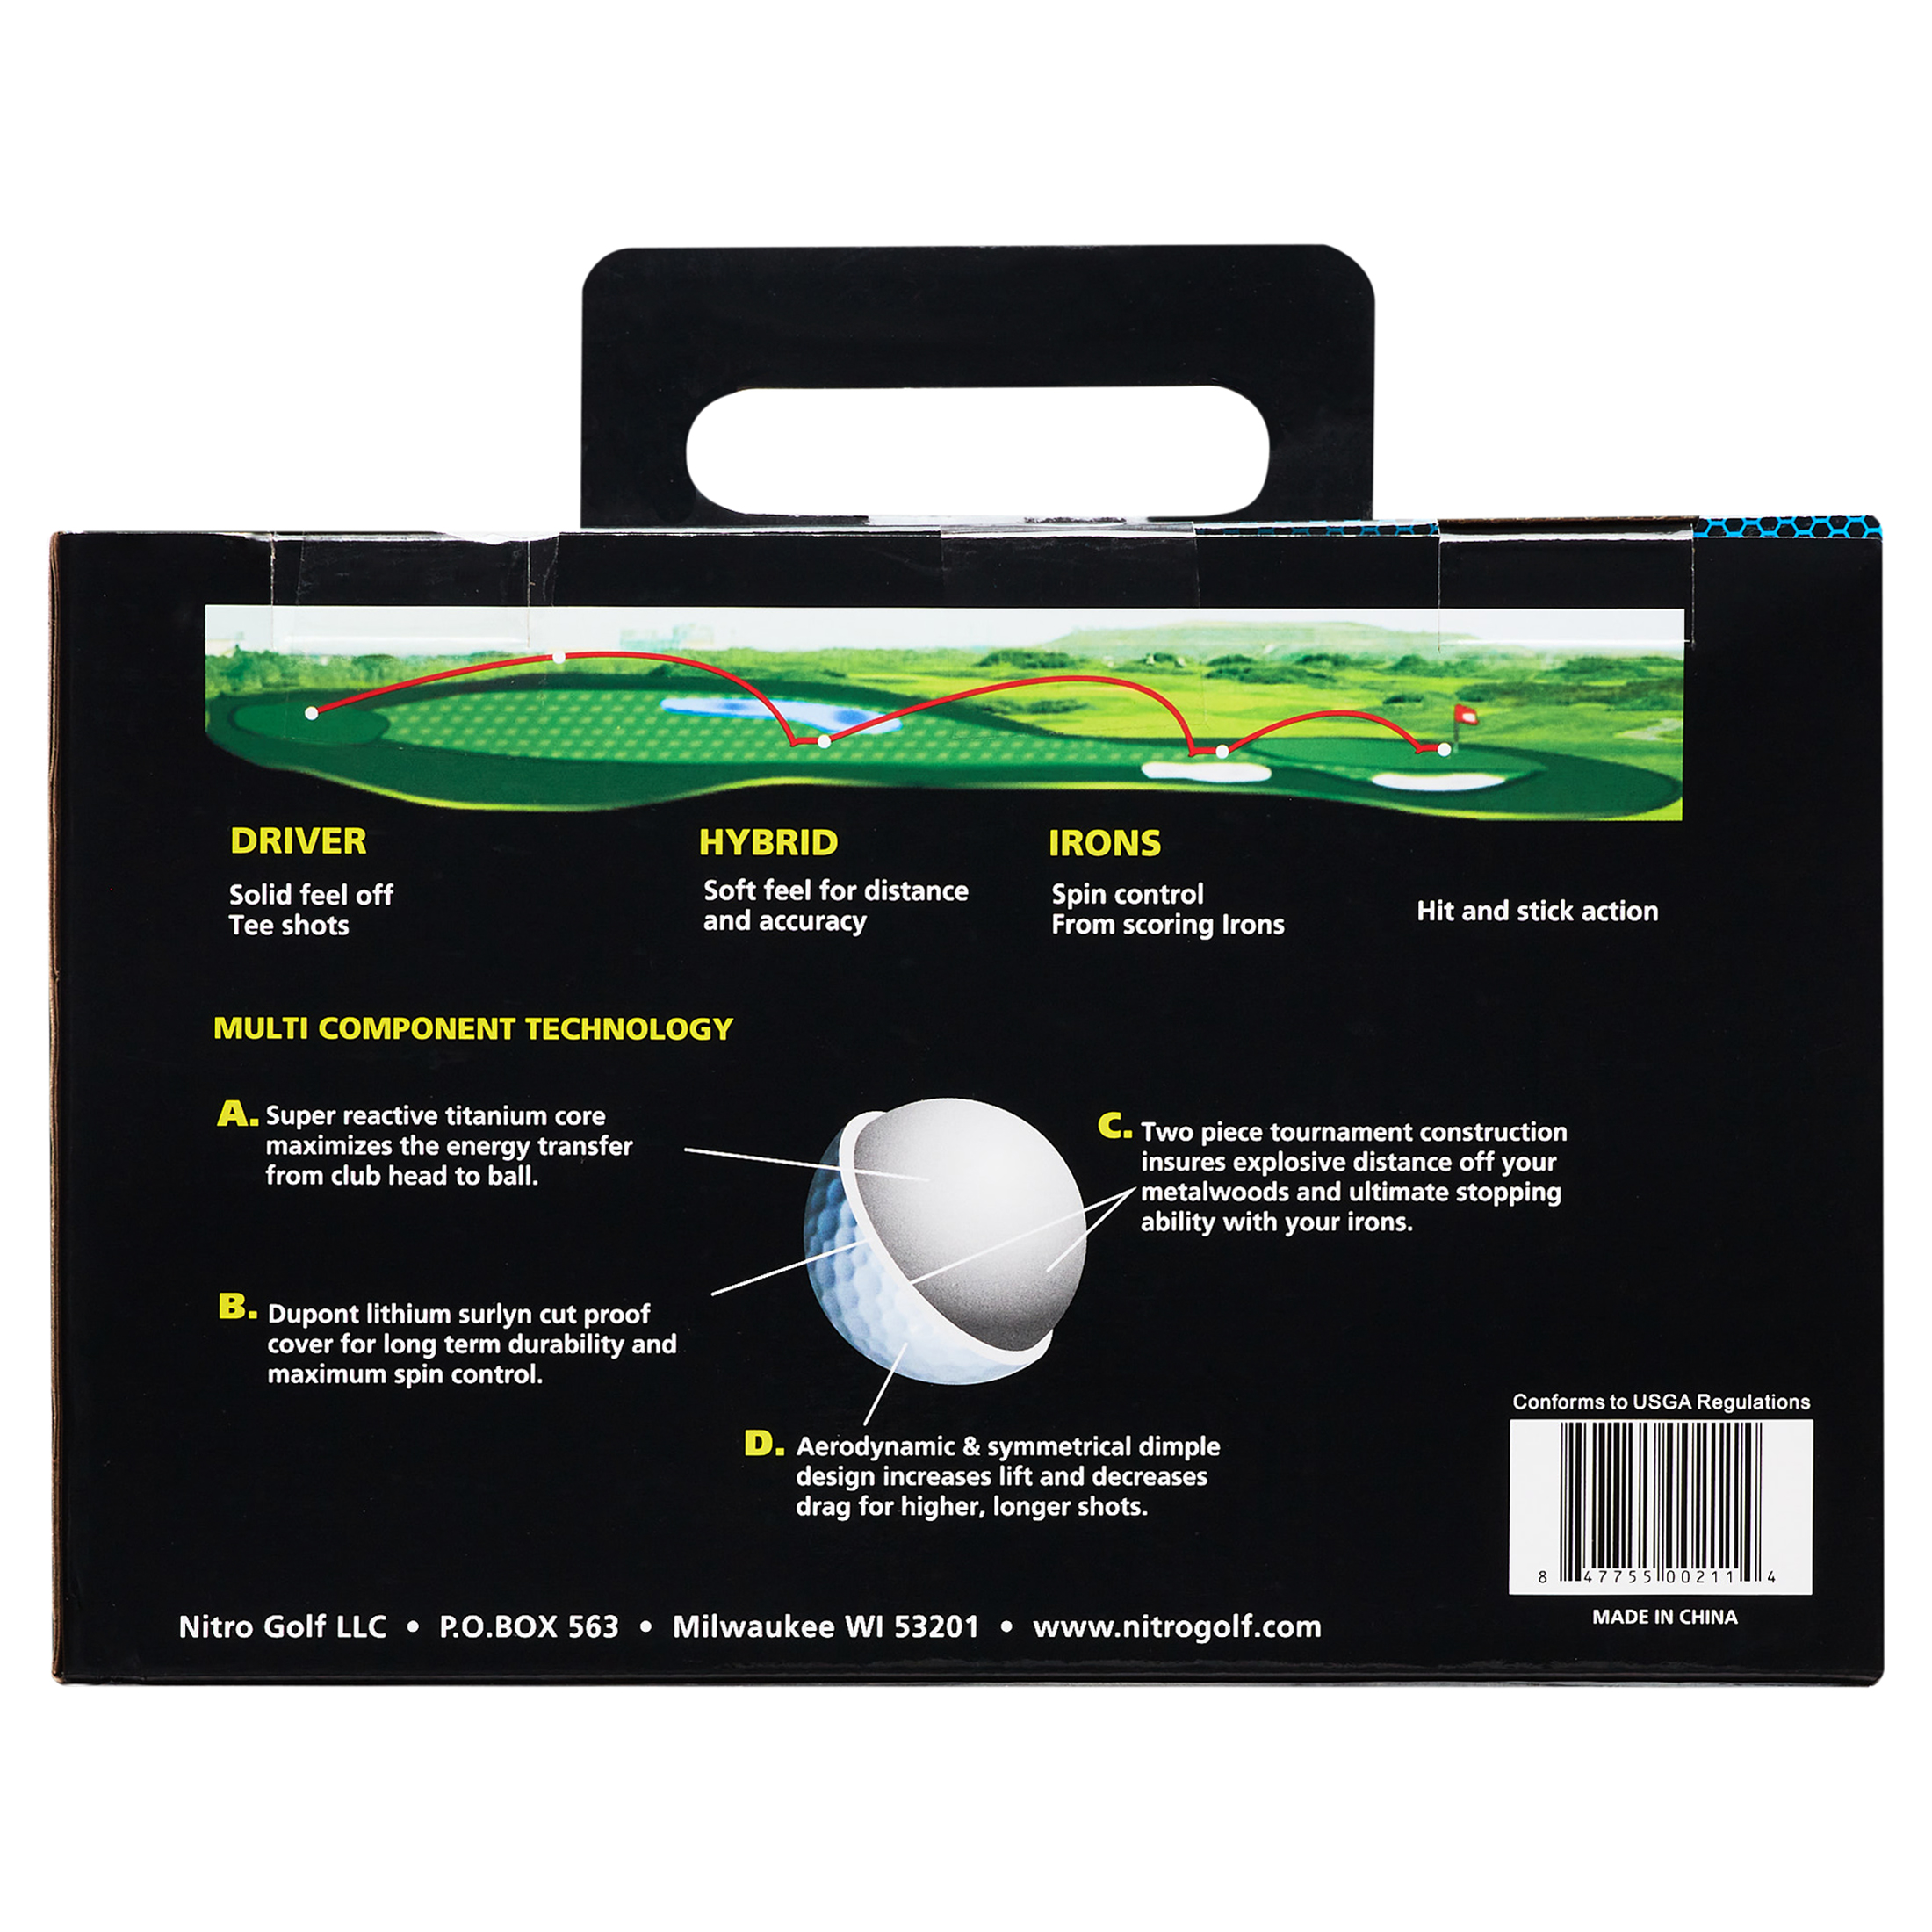 Nitro Golf Ultimate Distance Golf Balls, White, 45 Pack - image 3 of 4